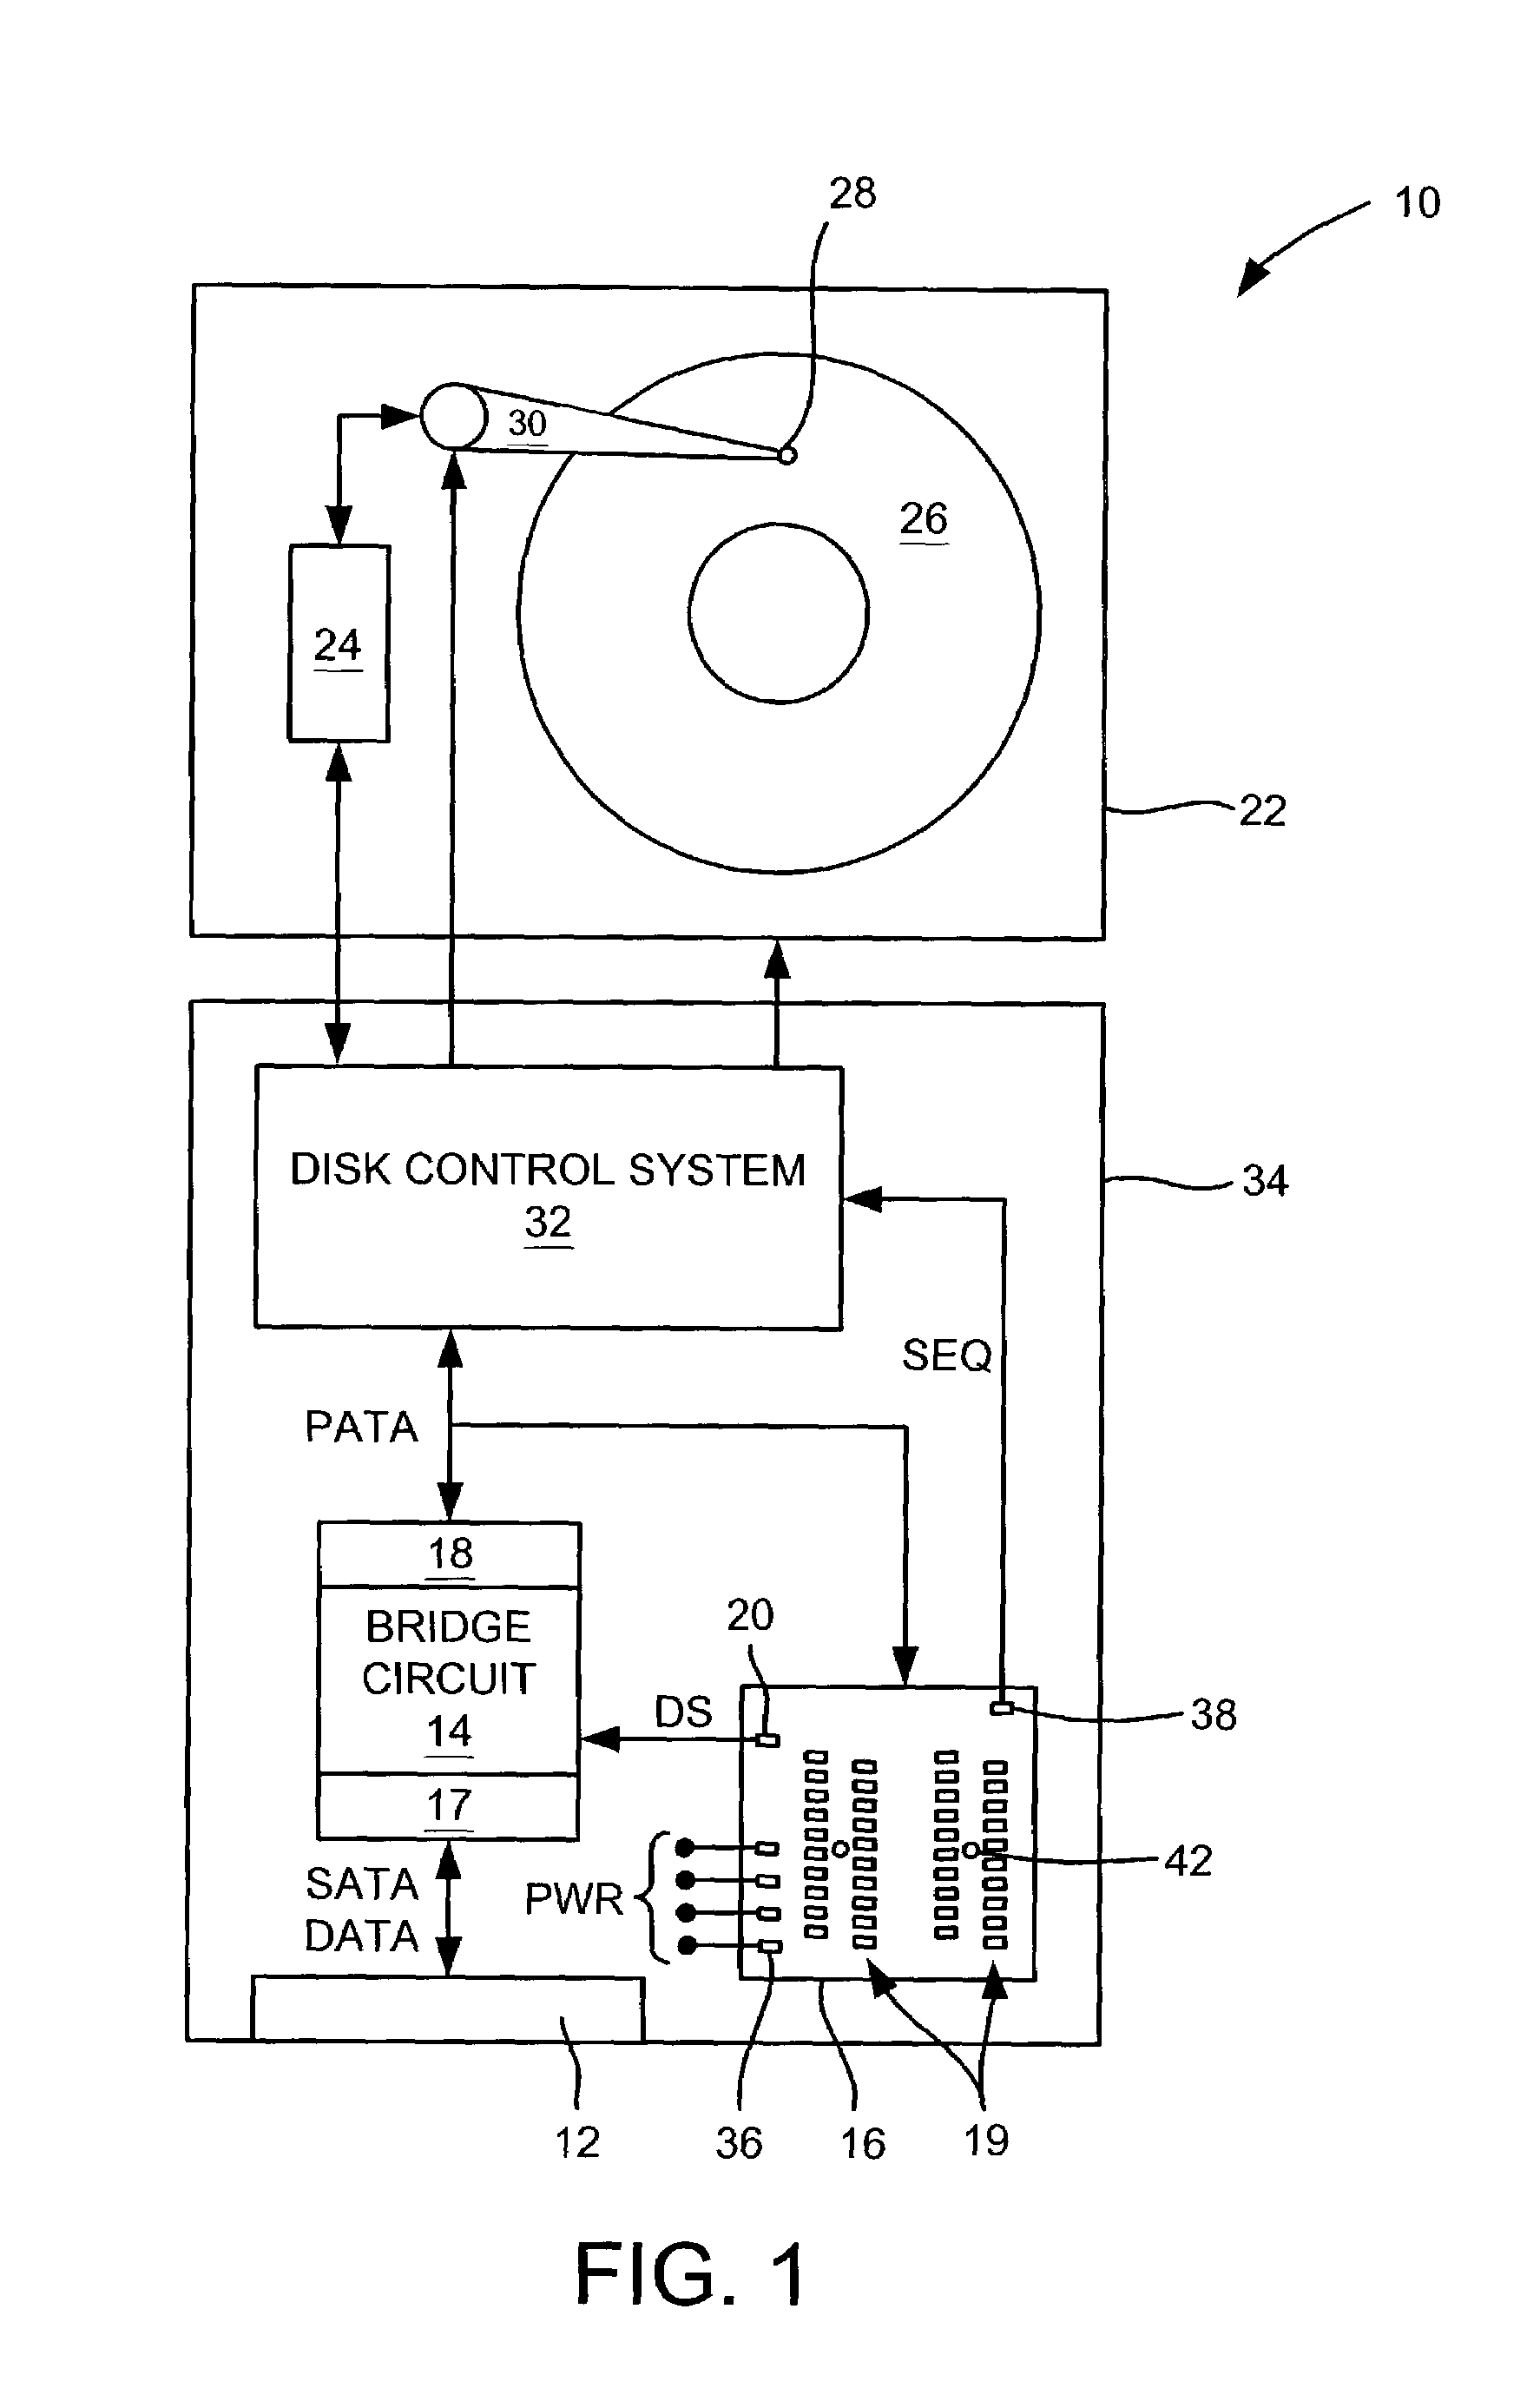 Serial ATA disk drive having a parallel ATA test interface and method